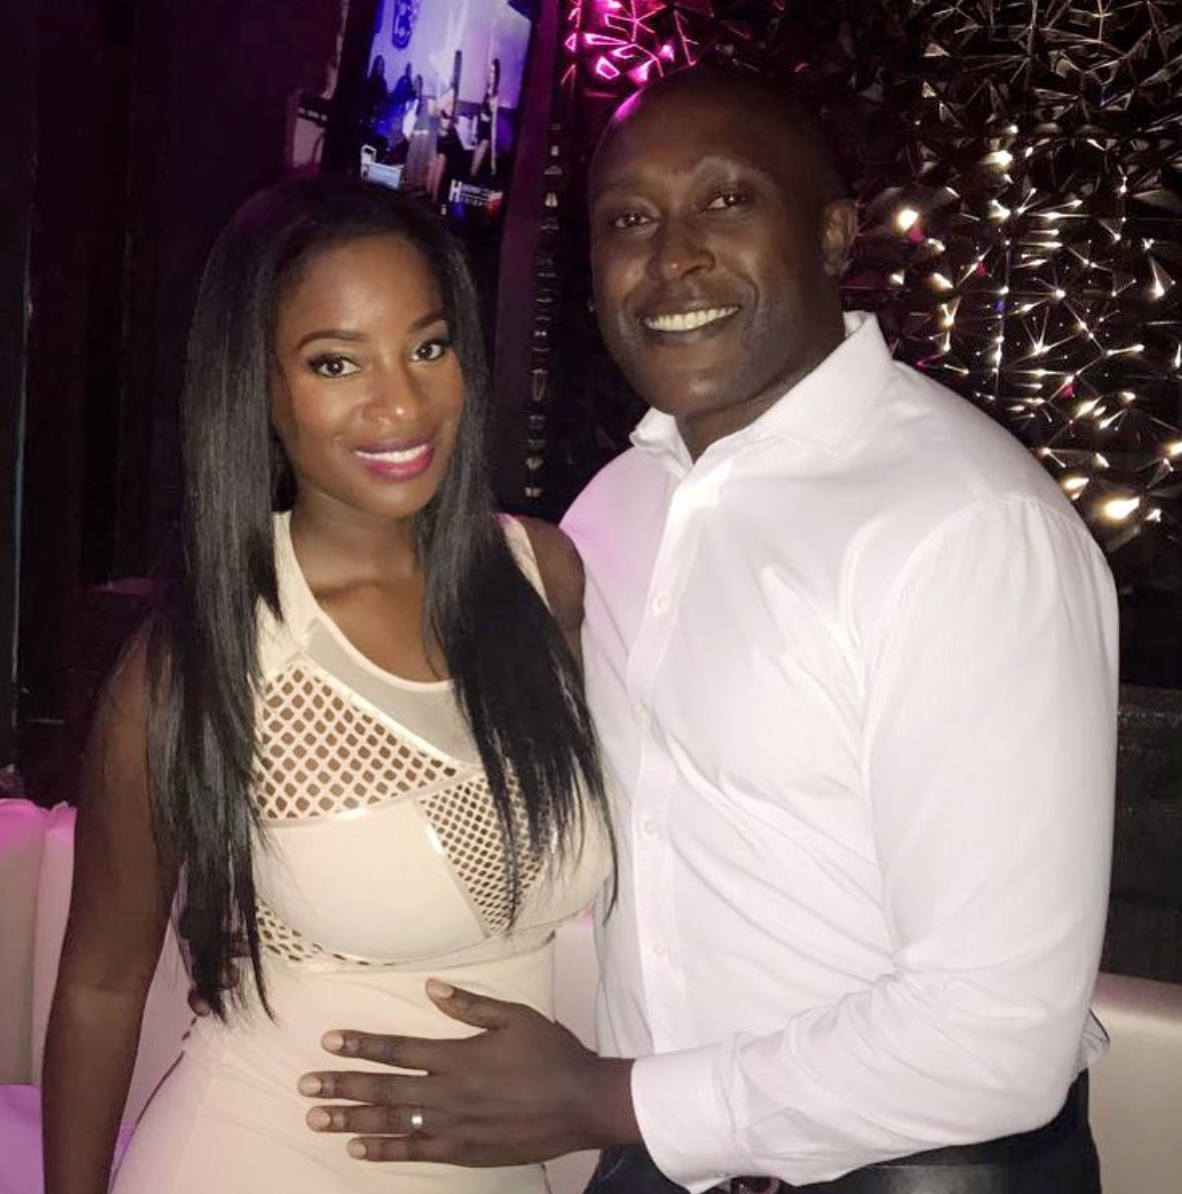 'Real Housewives of Atlanta's' Shamea Morton Is Expecting Her First Child
